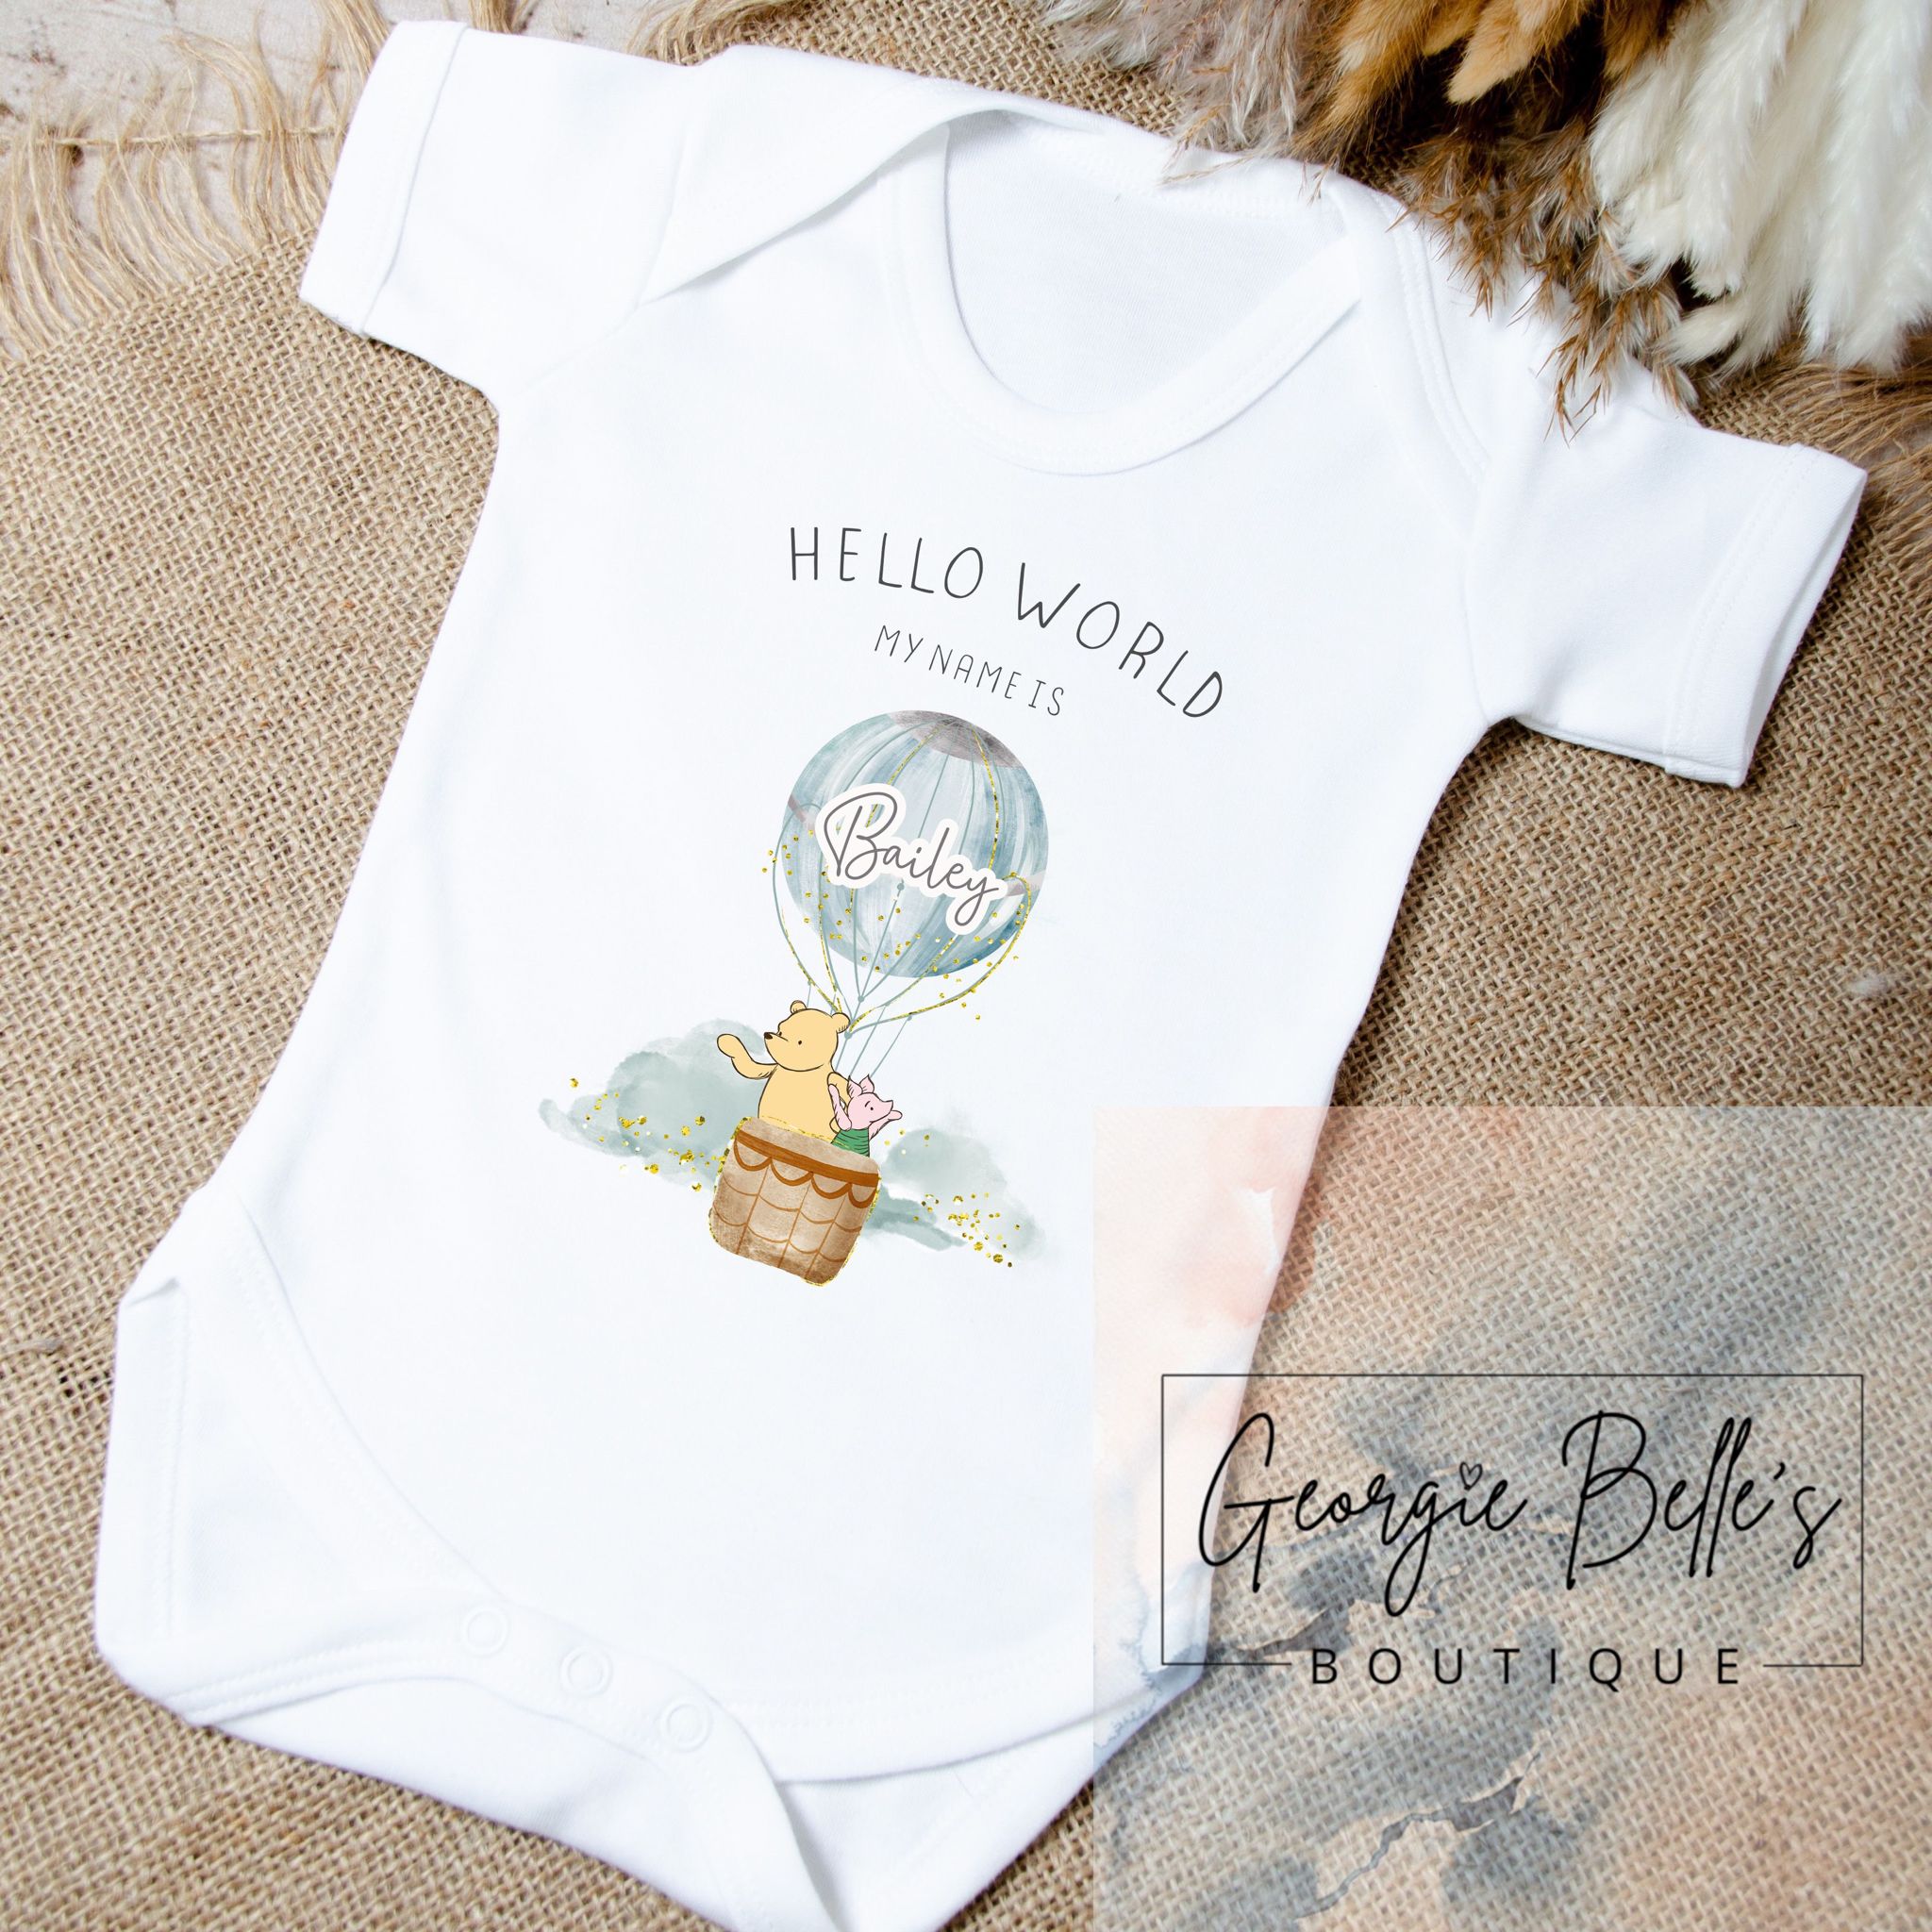 Personalised Announcement Vest / Babygrow - Winnie The Pooh Inspired Hot Air Balloon Wreath Design